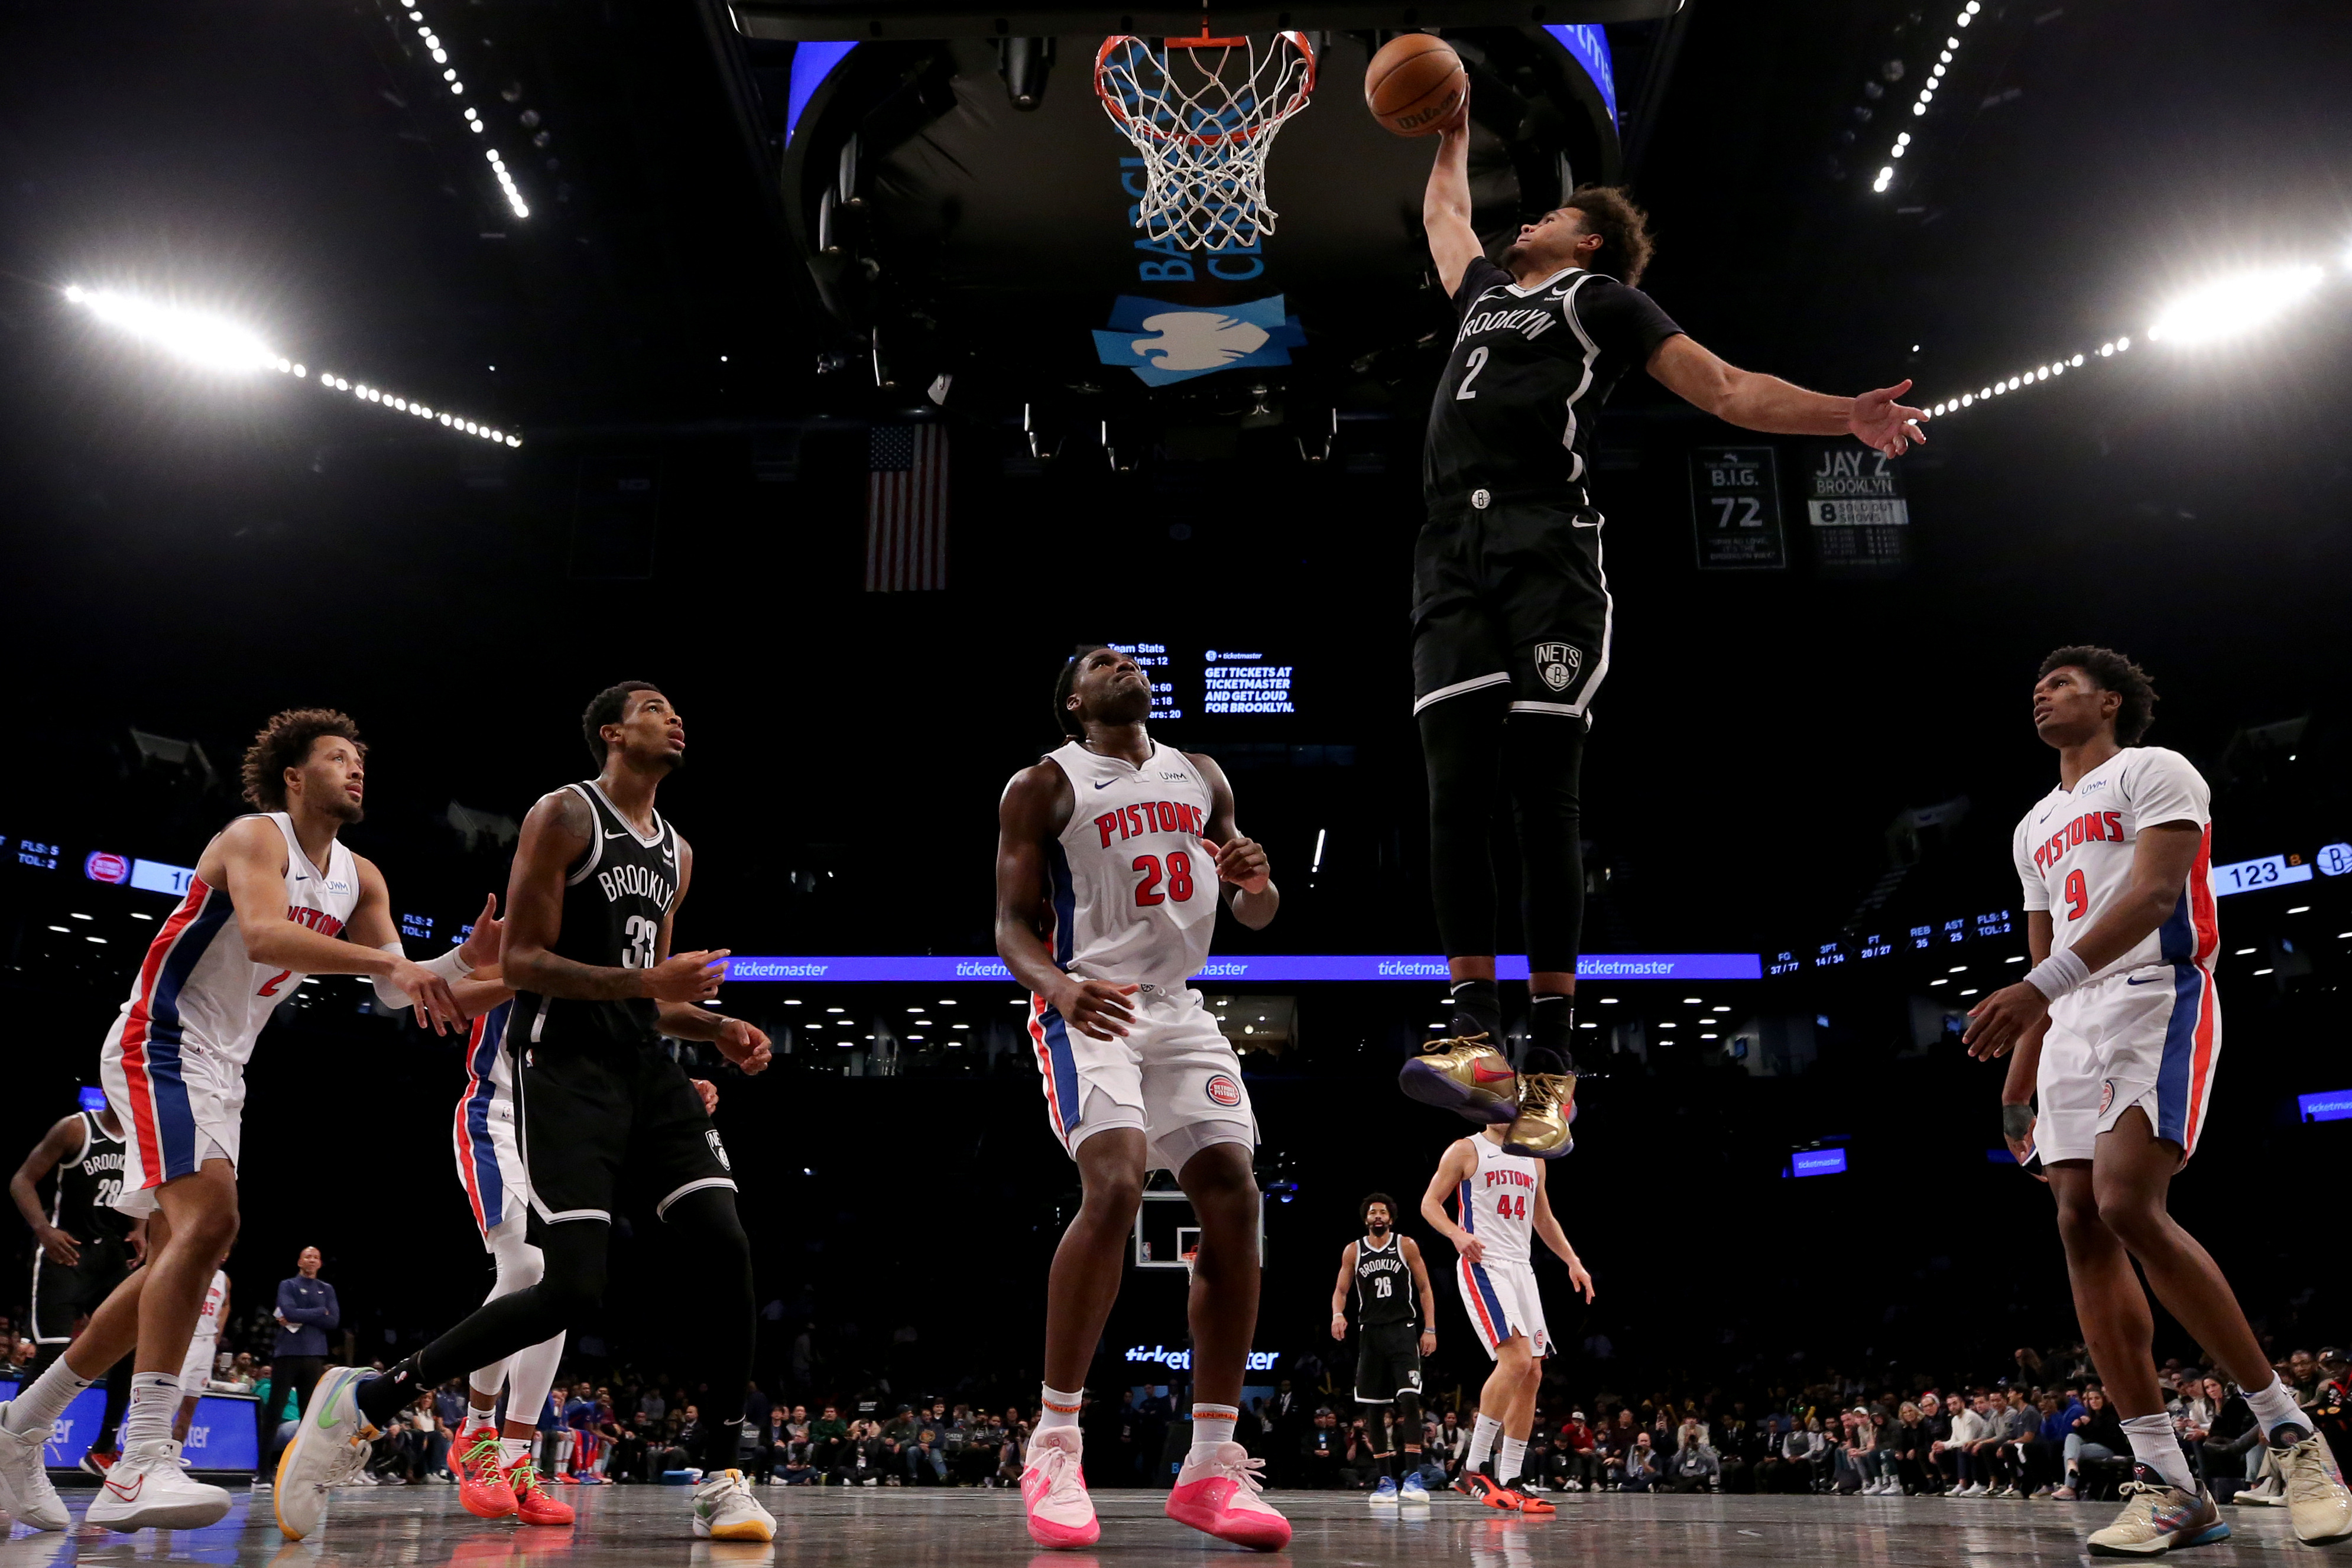 Brooklyn Nets vs. Detroit Pistons preview: The road trip begins - NetsDaily